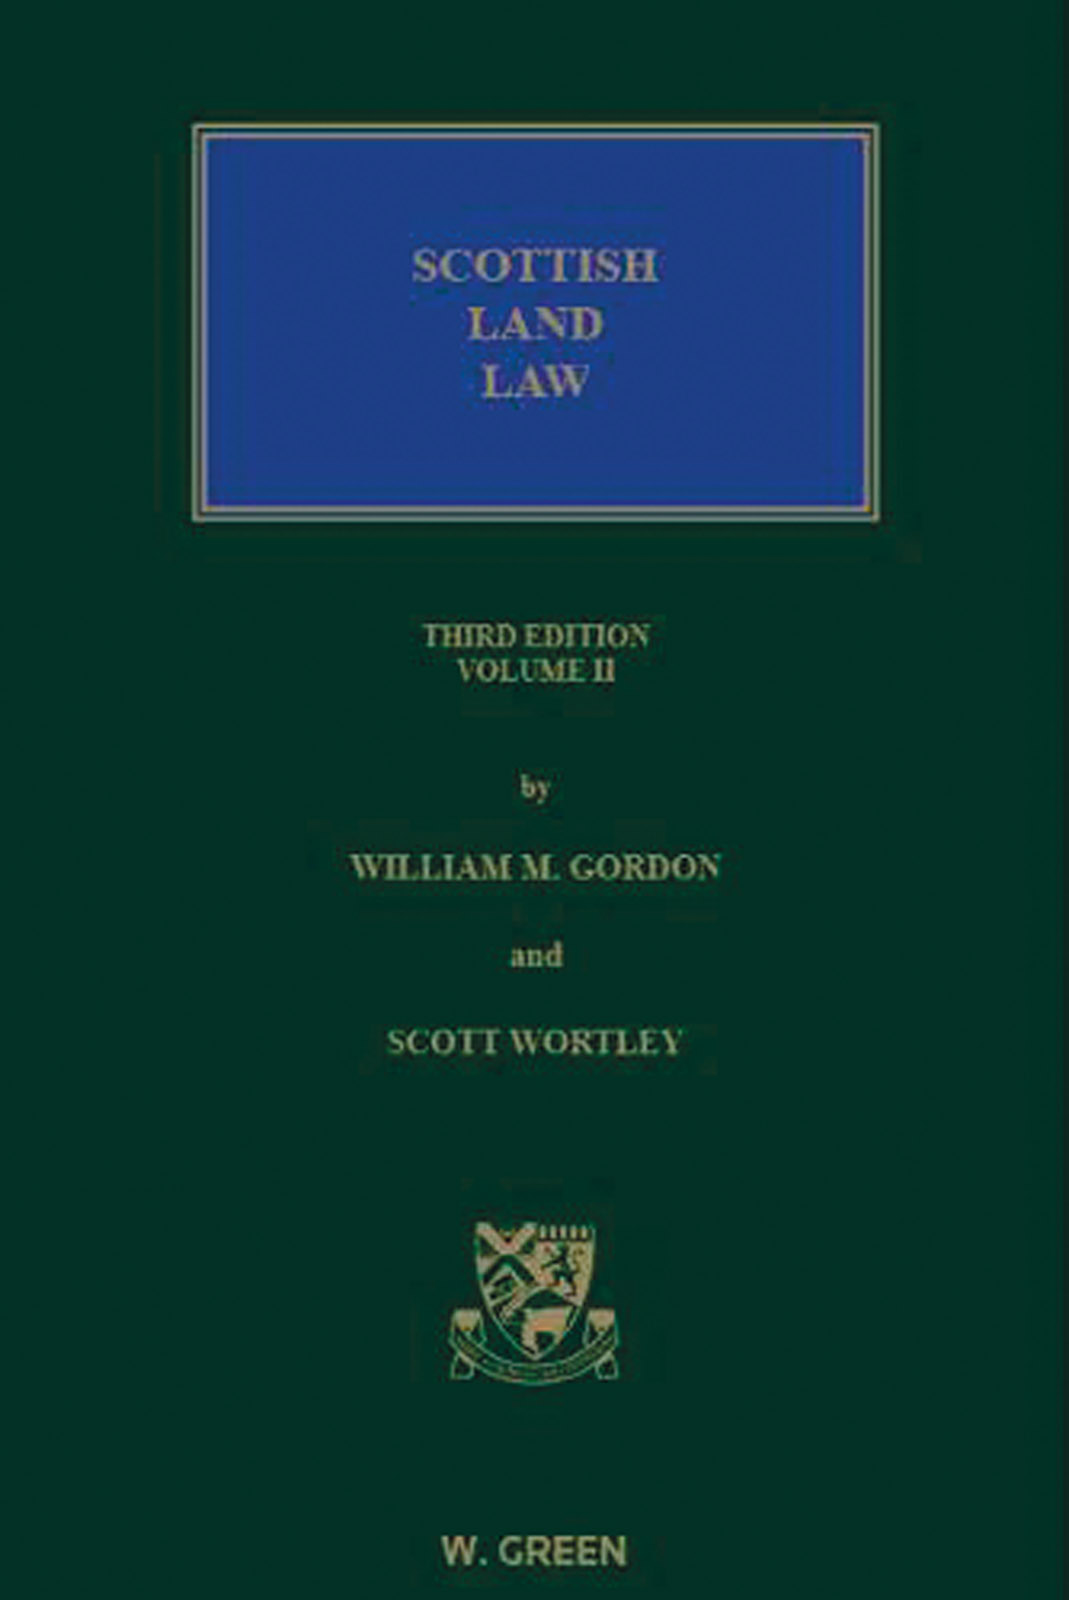 Cover, Scottish Land Law 3rd Edition